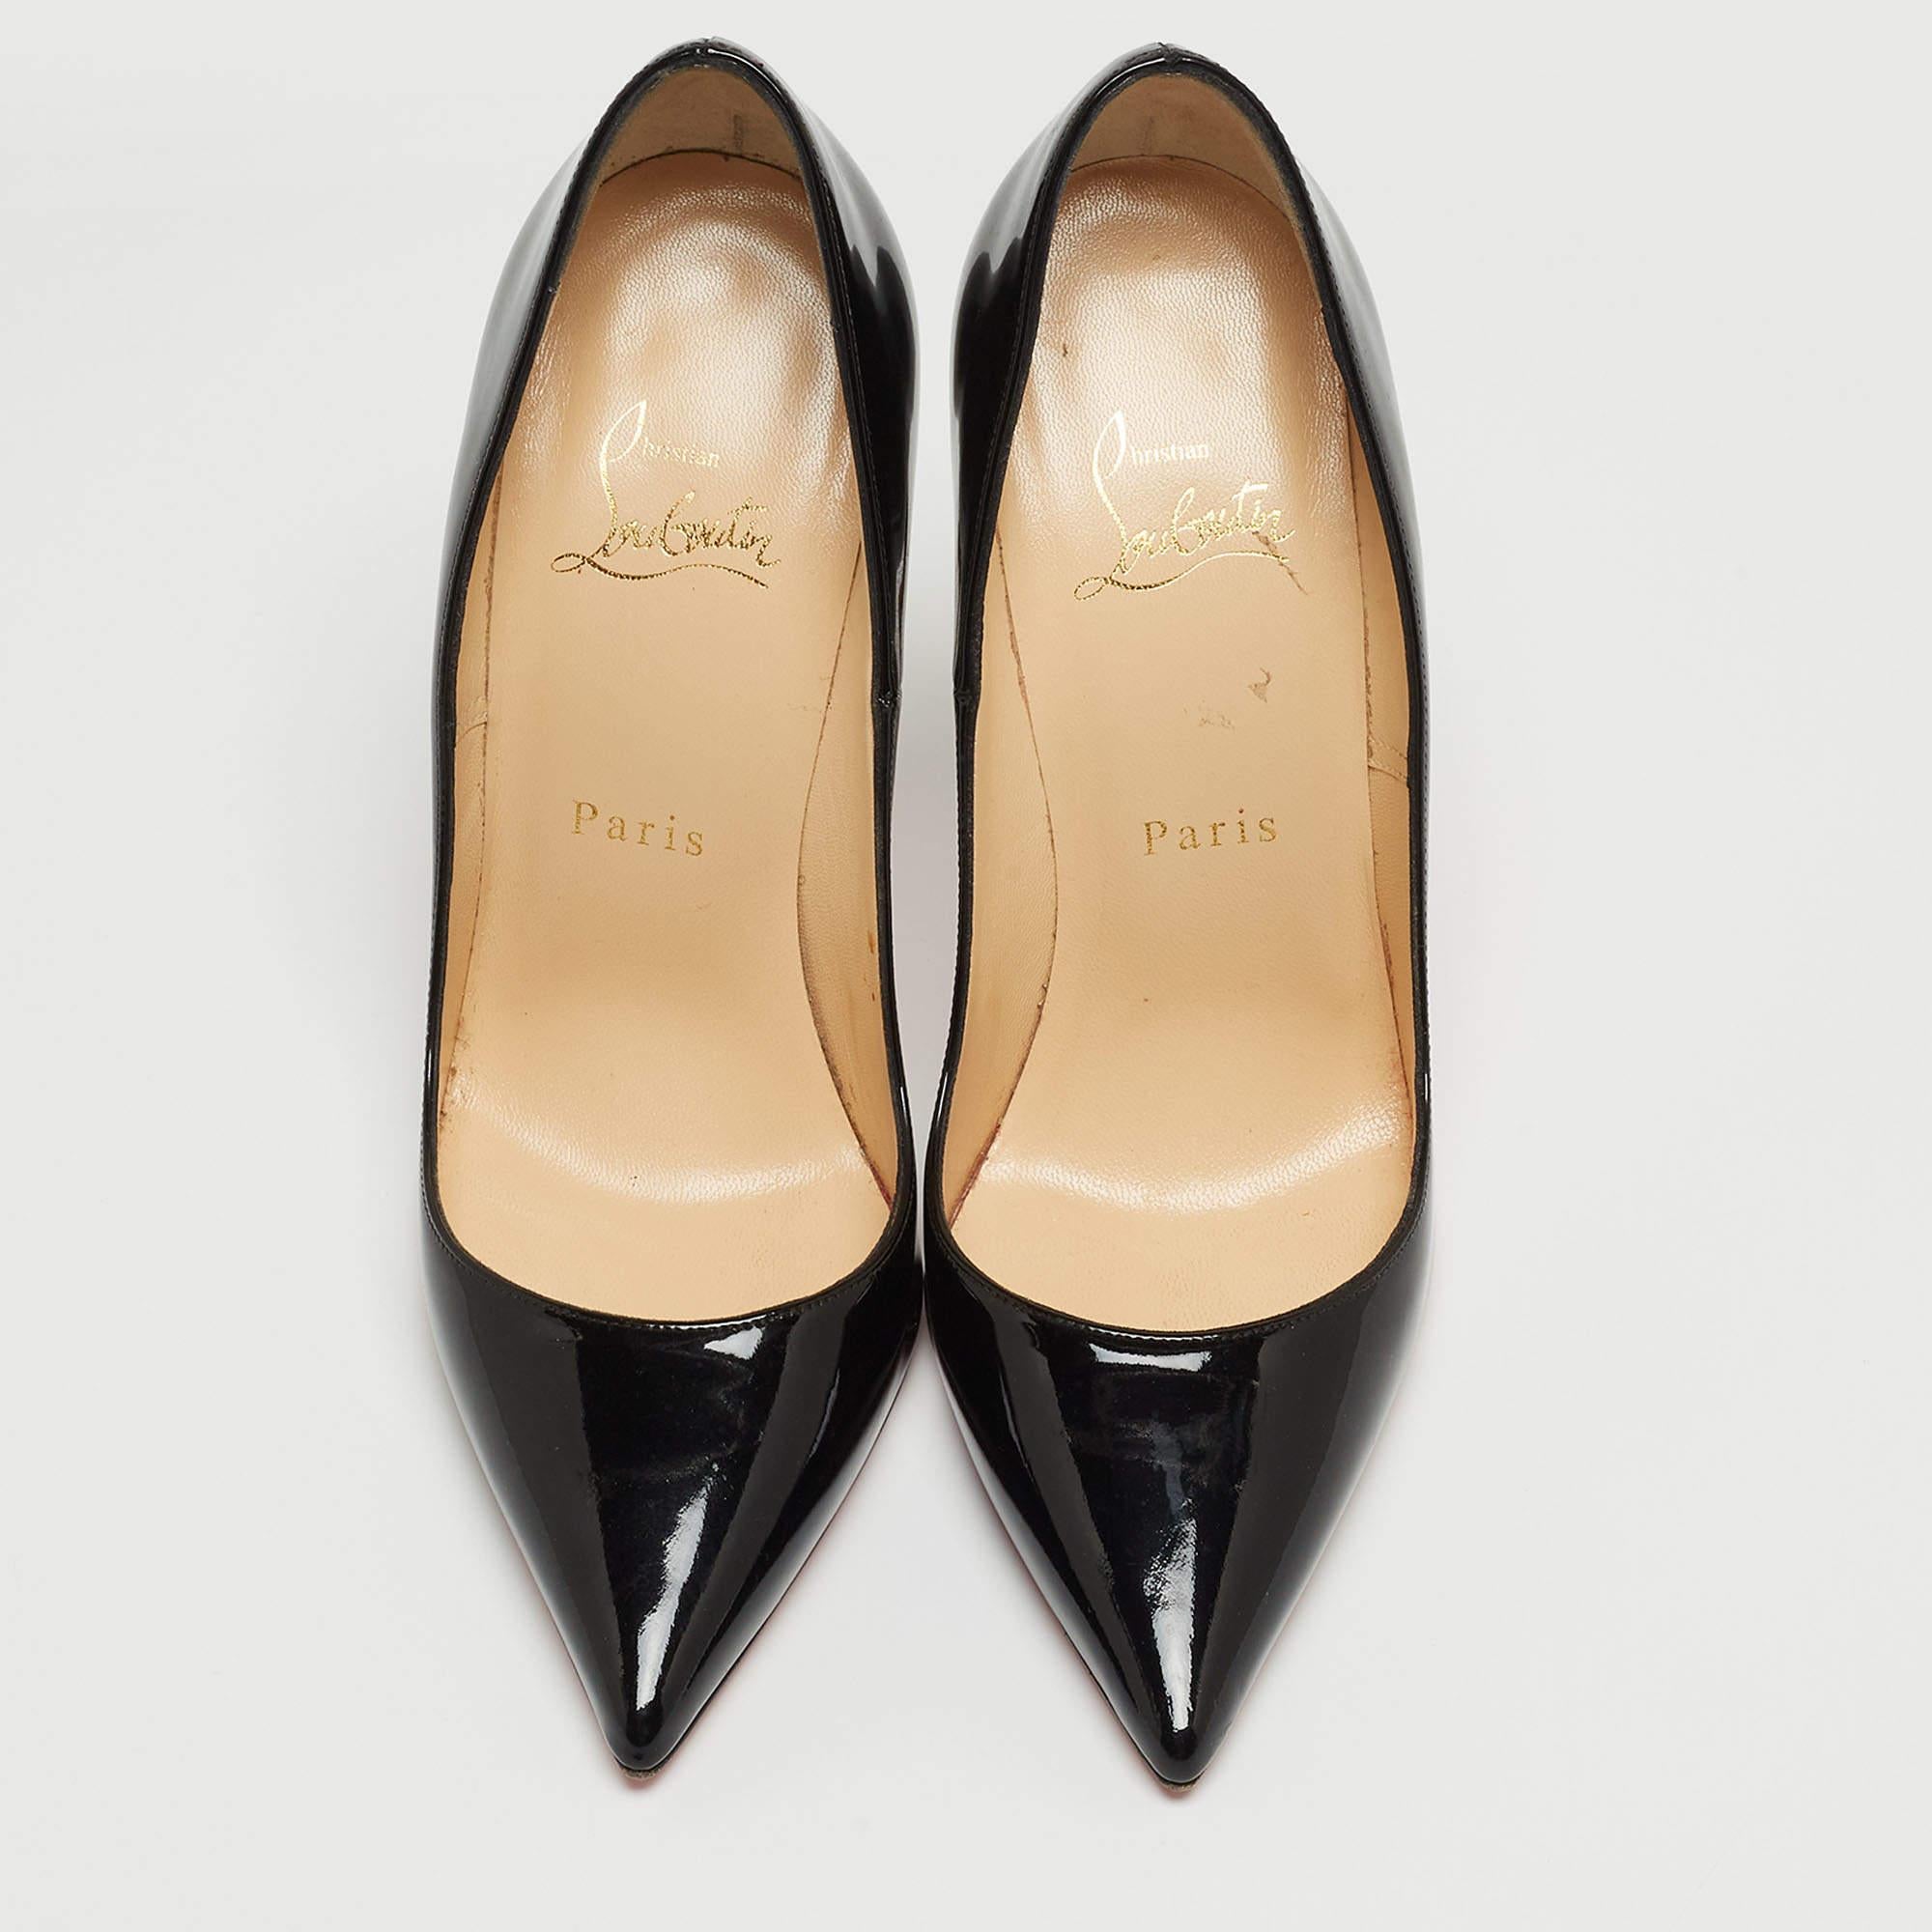 These black pumps from Christian Louboutin are meant to be a loved choice. Wonderfully crafted and balanced on sleek heels, the pumps will lift your feet in a stunning silhouette.

